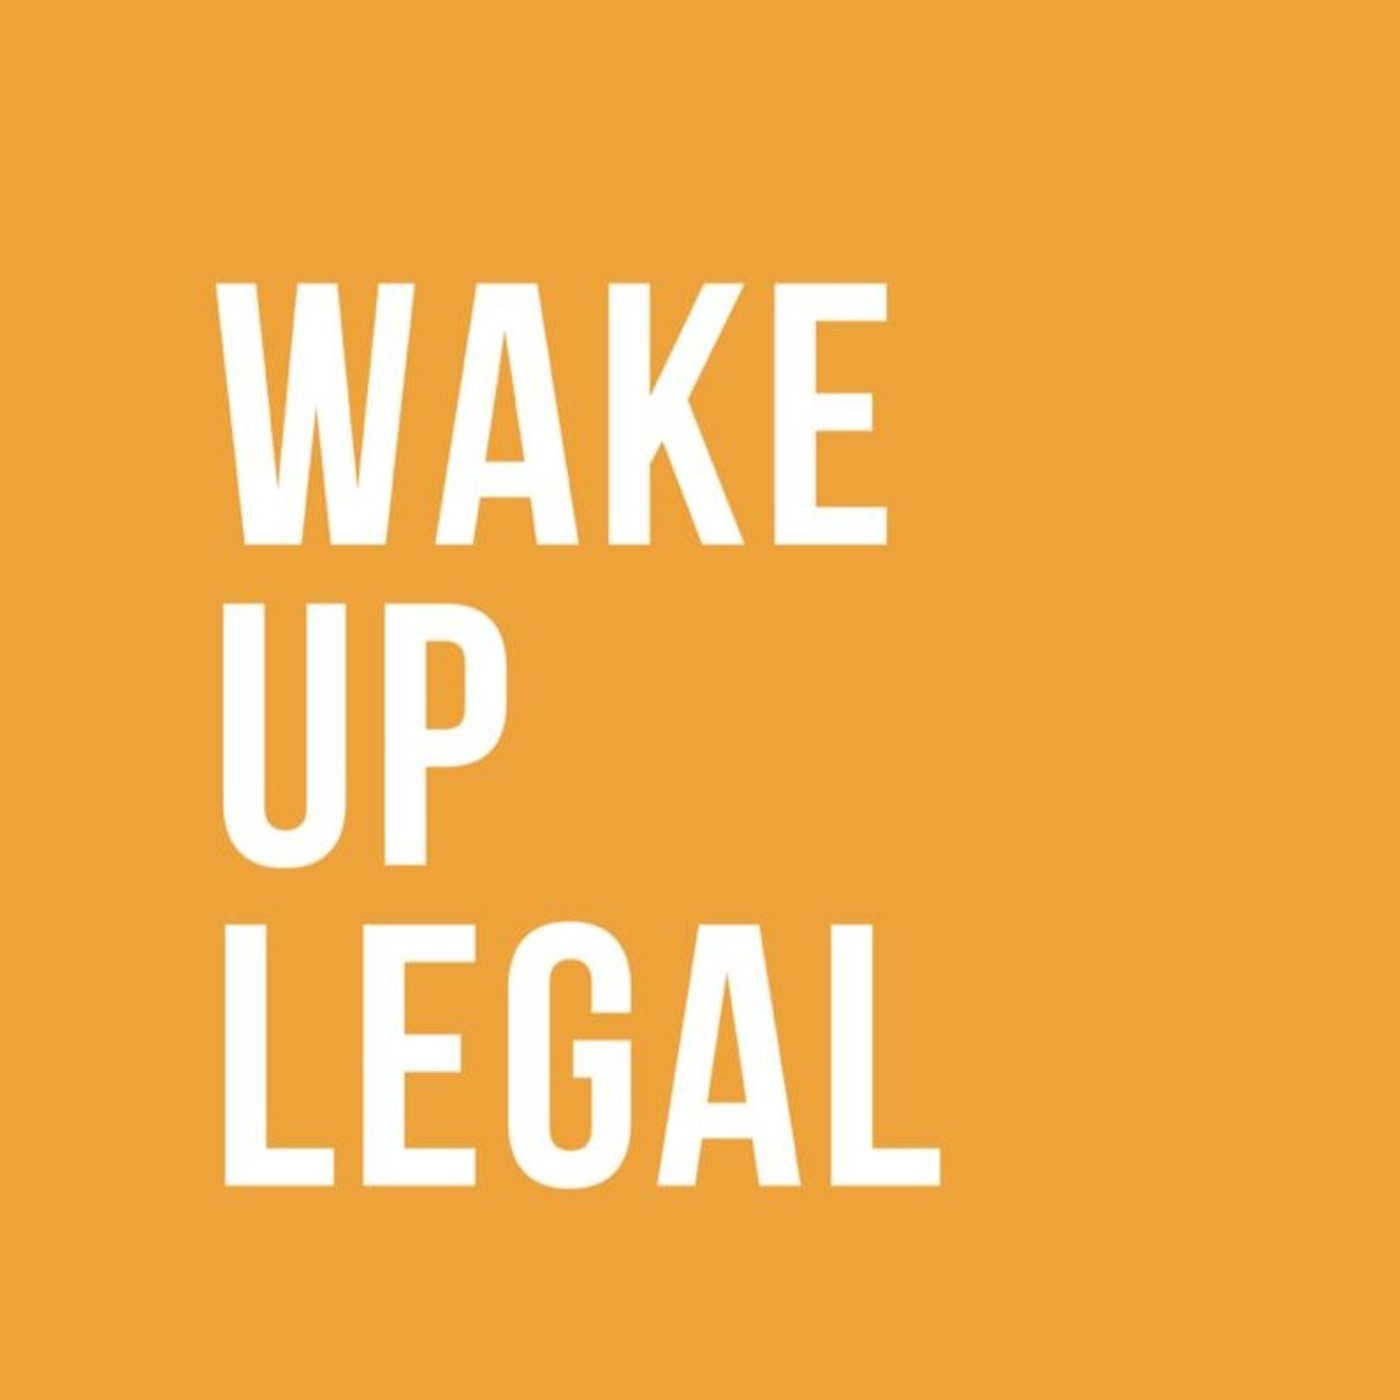 Wake Up Legal